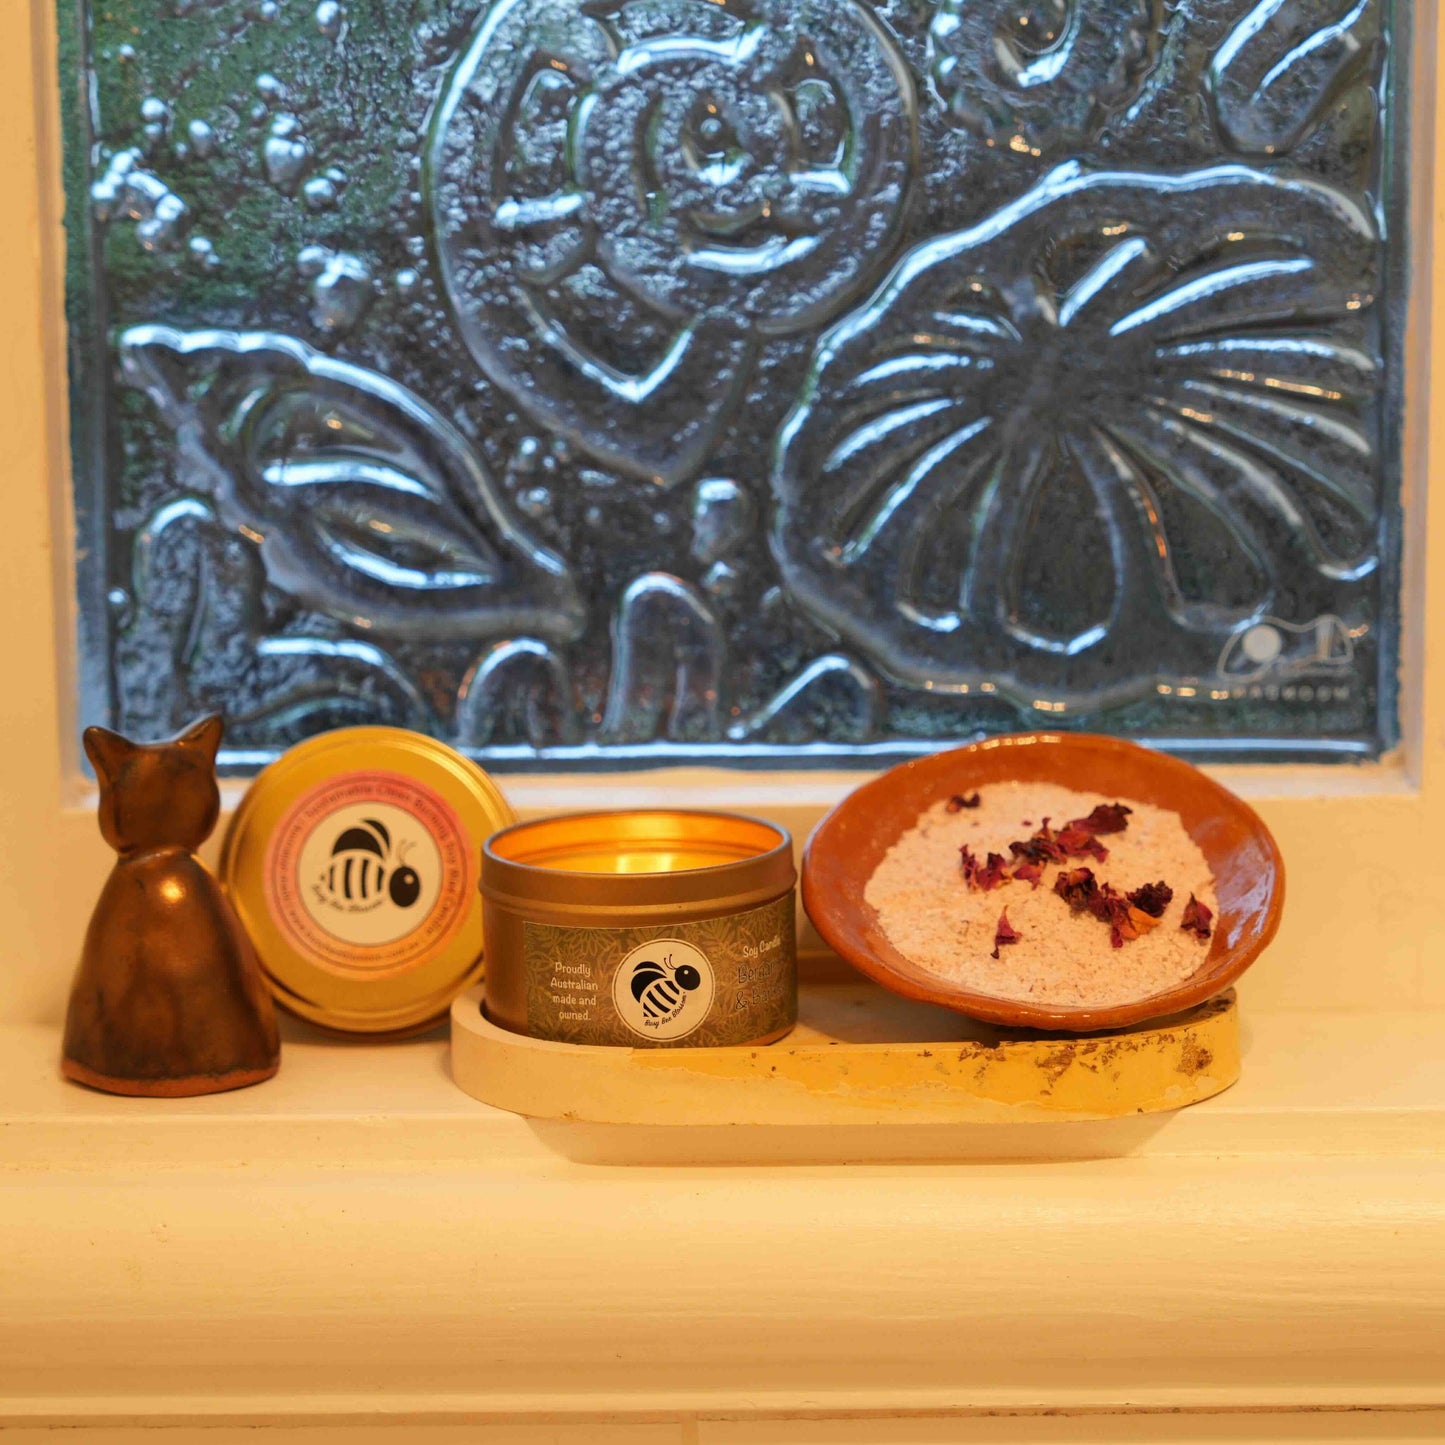 Bathroom windowsill with a lit candle, candle snuffer and Goat ate my roses Milk Bath Soak